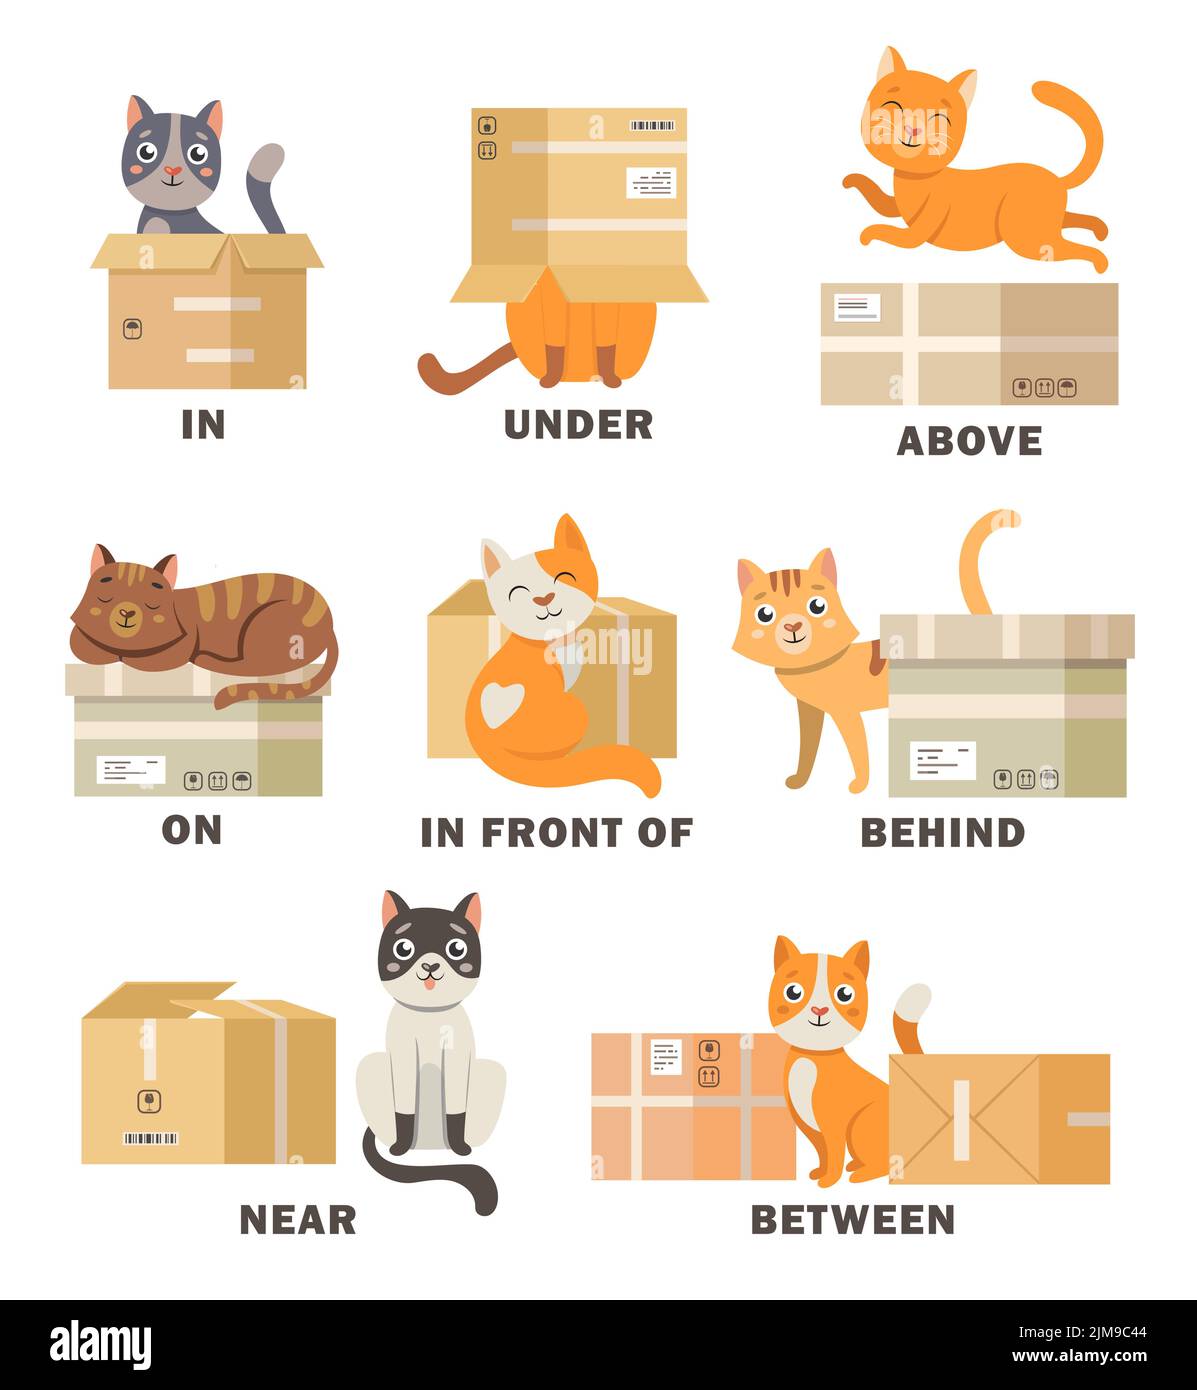 English prepositions with cute animal. Cartoon dog behind, above